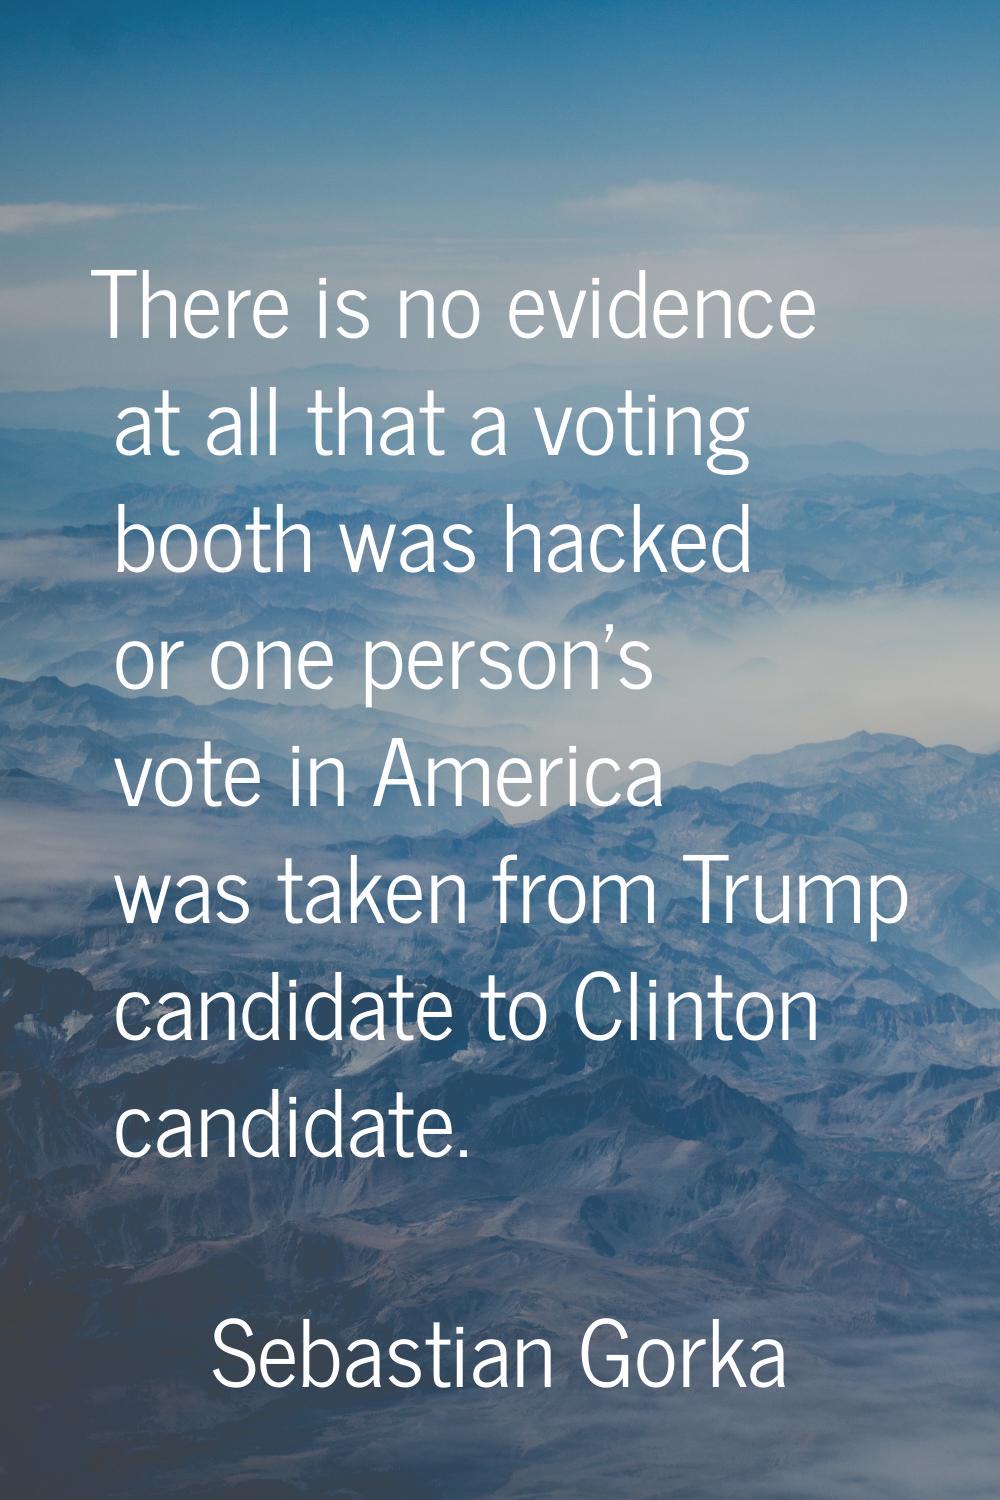 There is no evidence at all that a voting booth was hacked or one person's vote in America was take